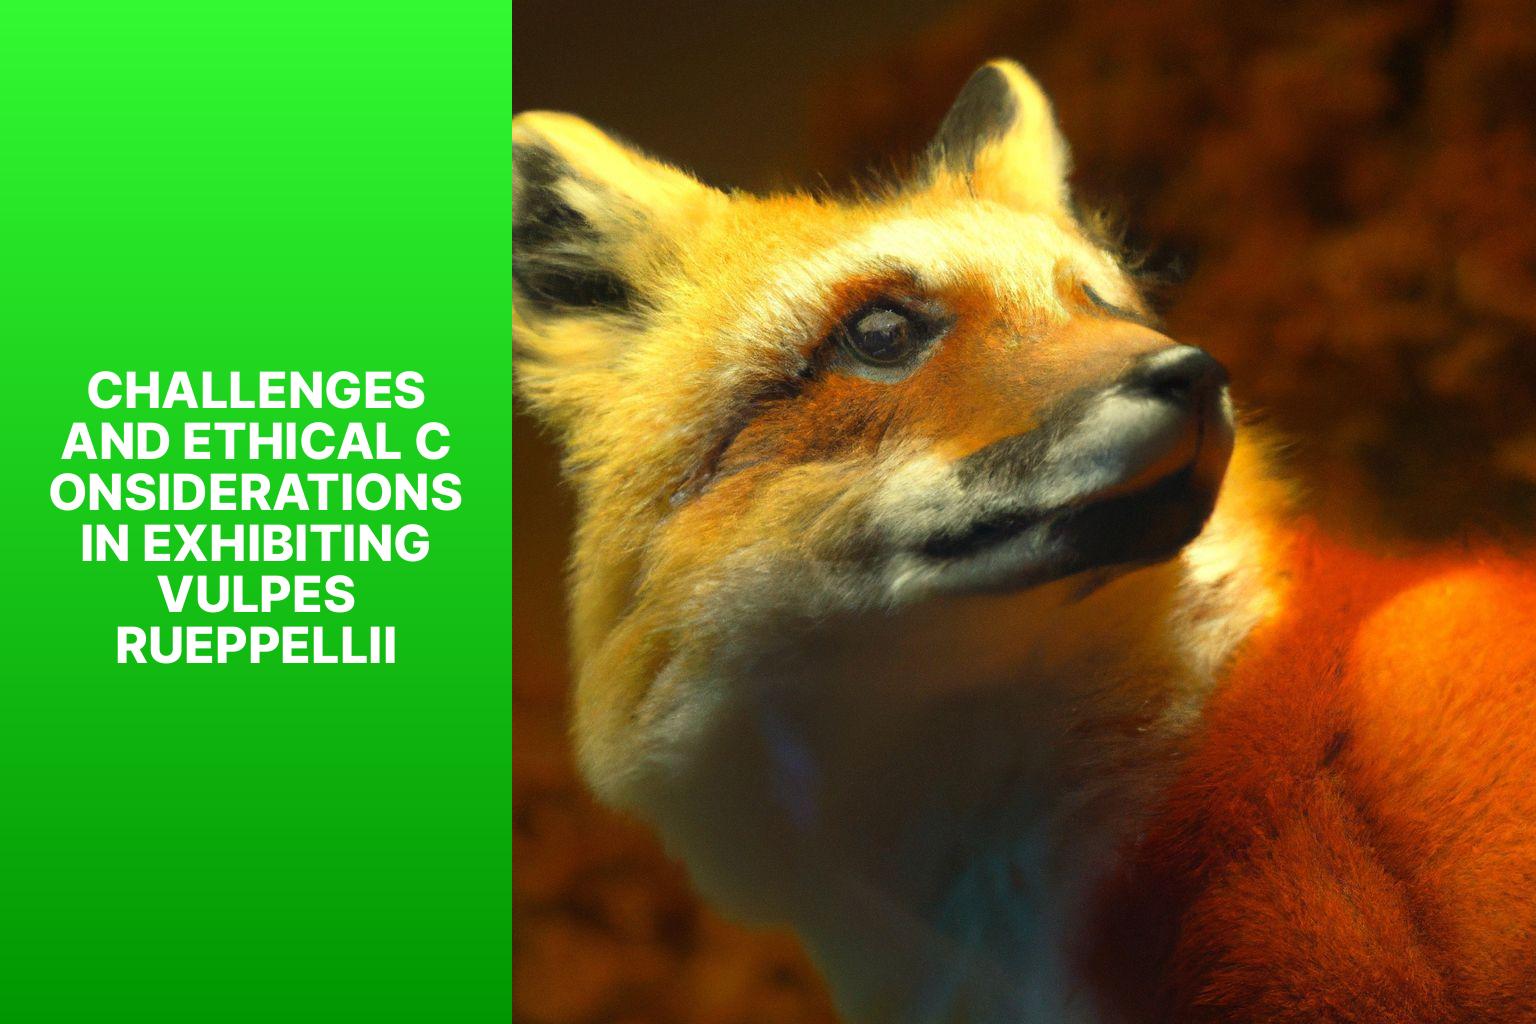 Challenges and Ethical Considerations in Exhibiting Vulpes rueppellii - Vulpes rueppellii in Museums 